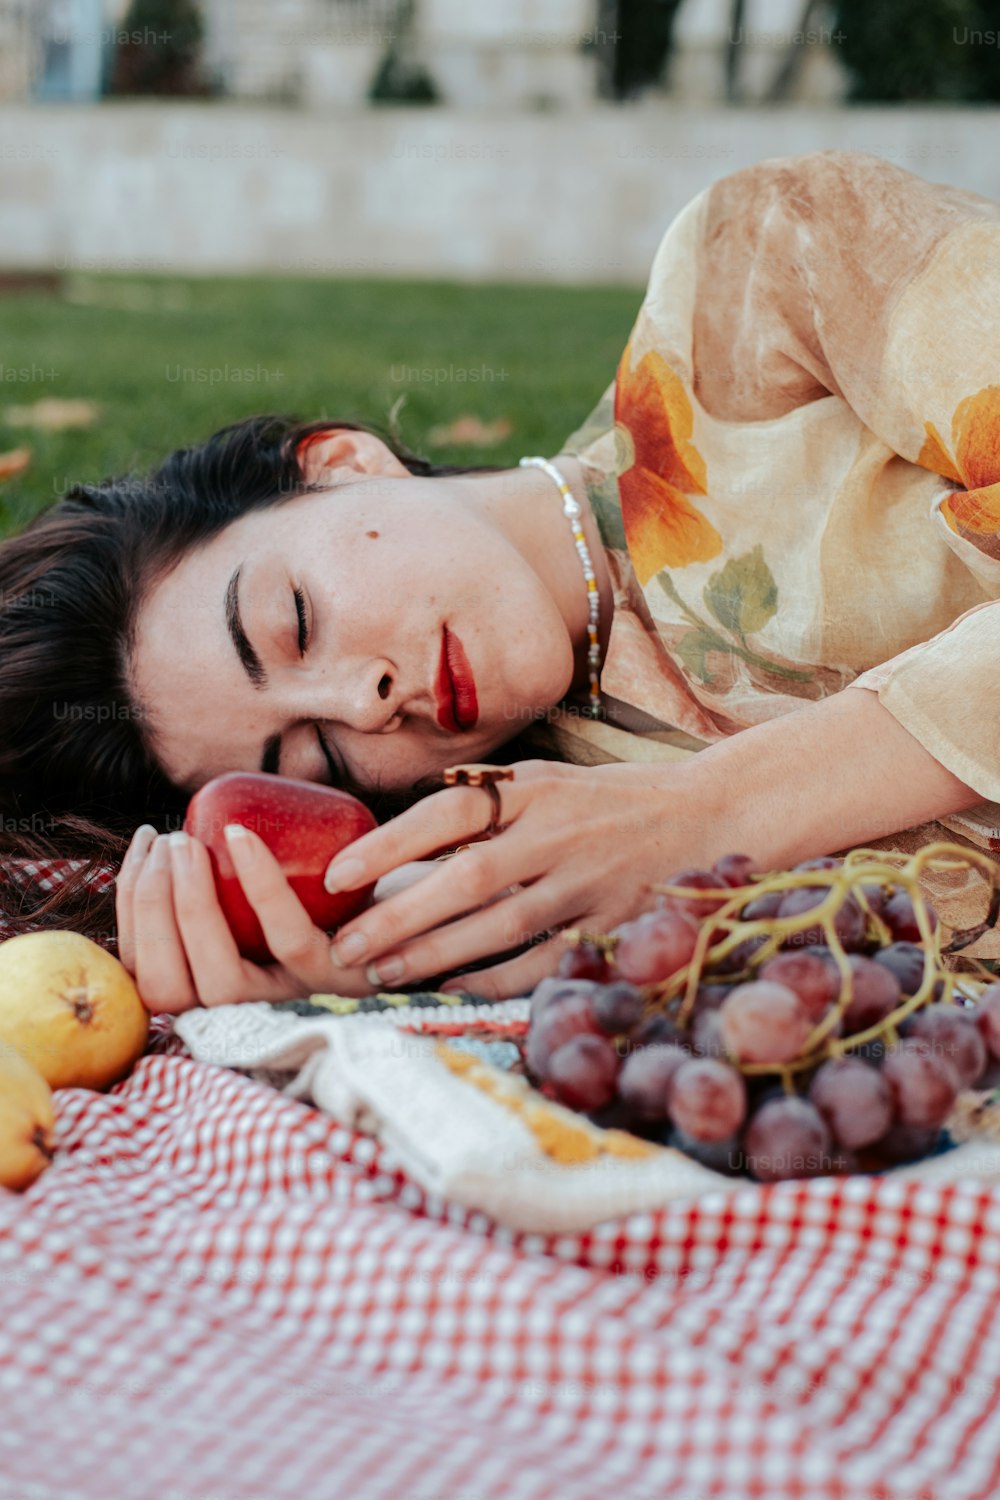 a woman laying on a blanket with grapes and apples